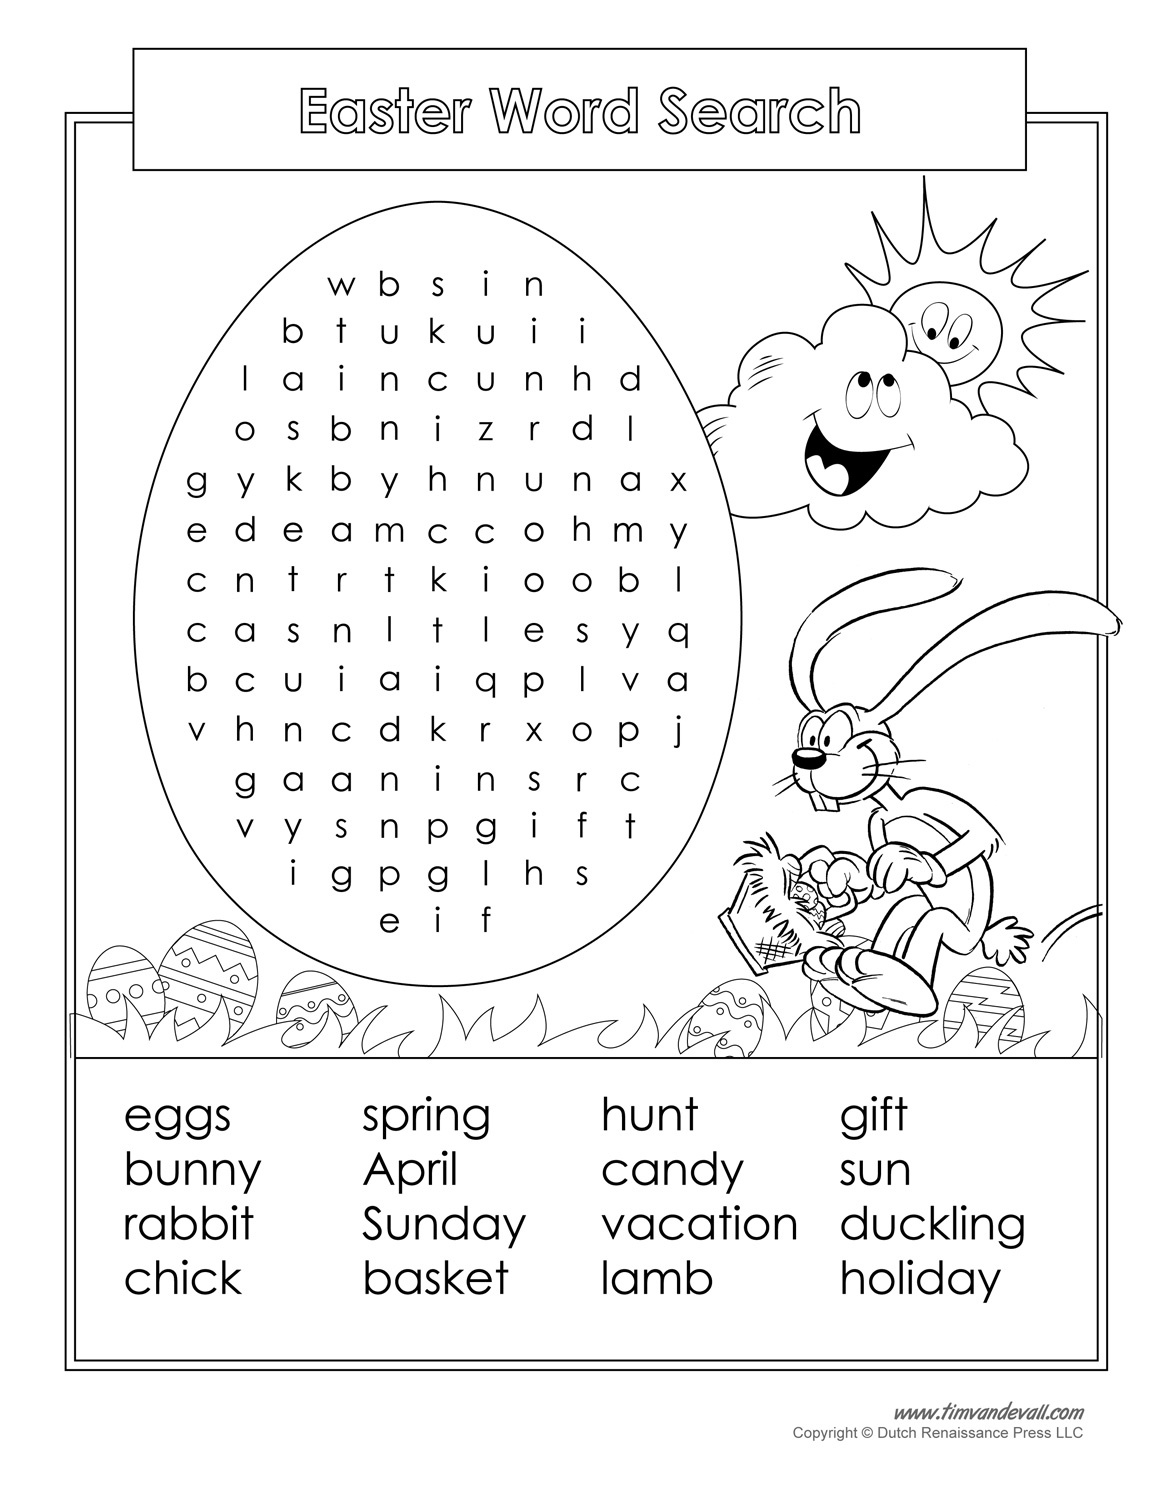 16 Printable Easter Word Search Puzzles | Kittybabylove - Free Printable Easter Puzzles For Adults